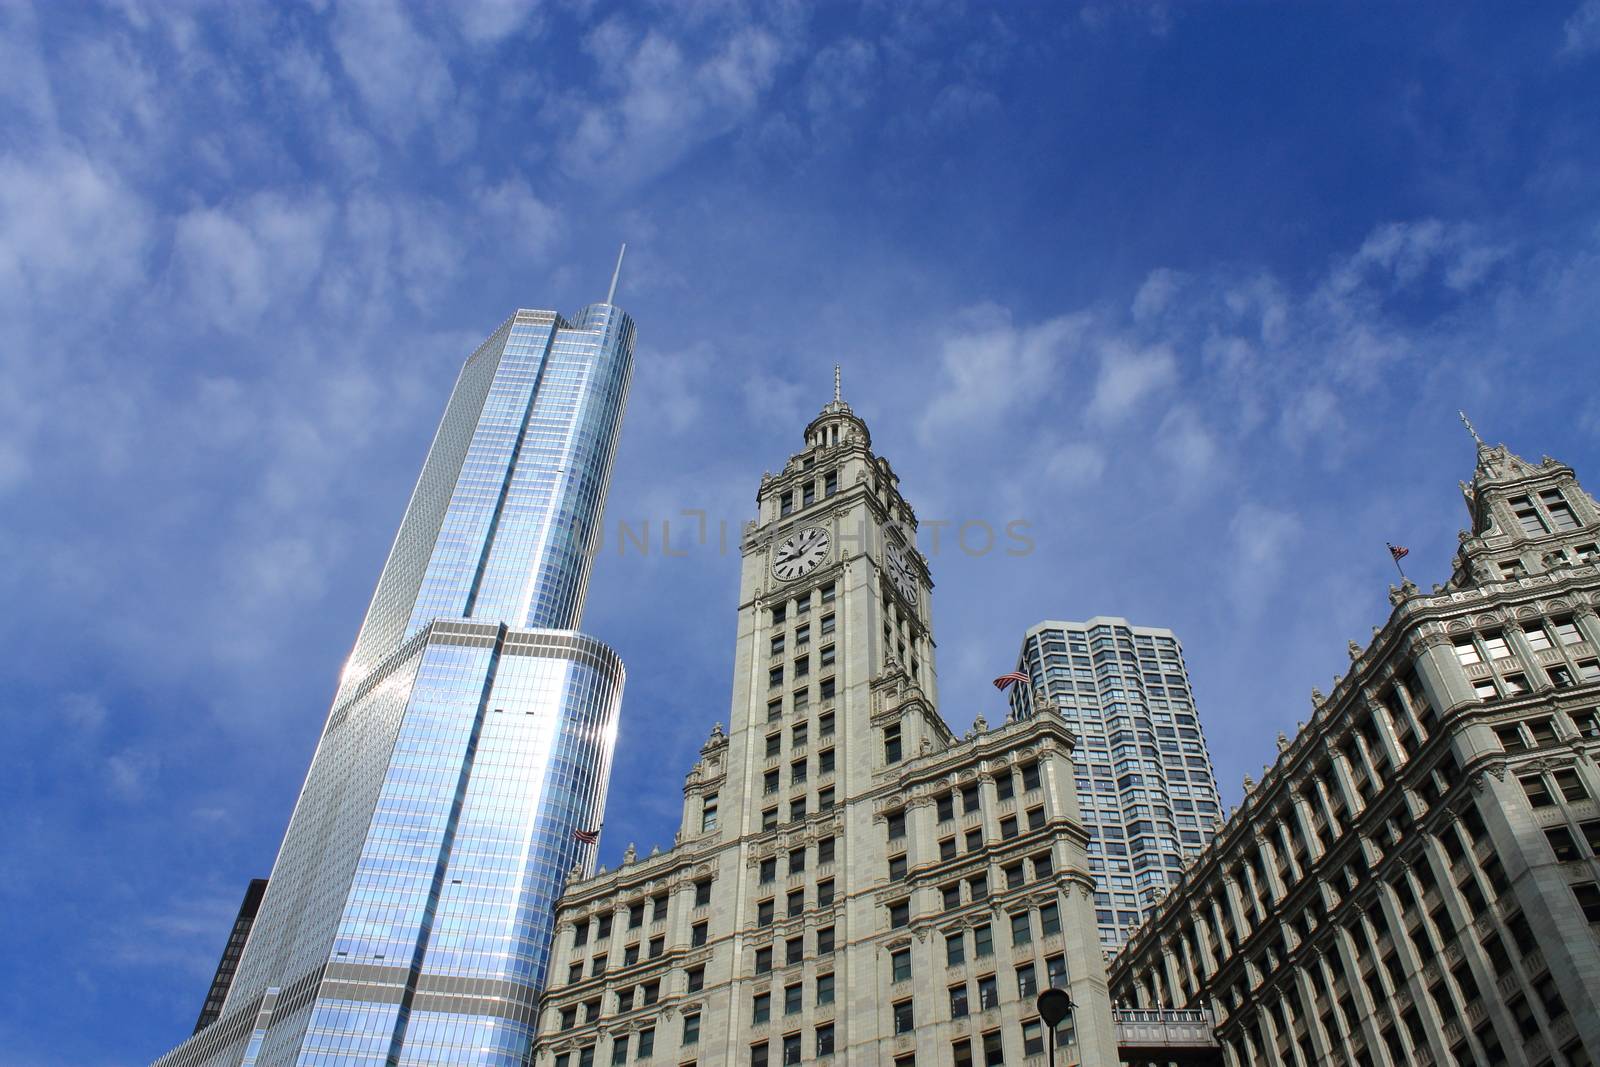 Wrigley Building and Trump Tower in Chicago.